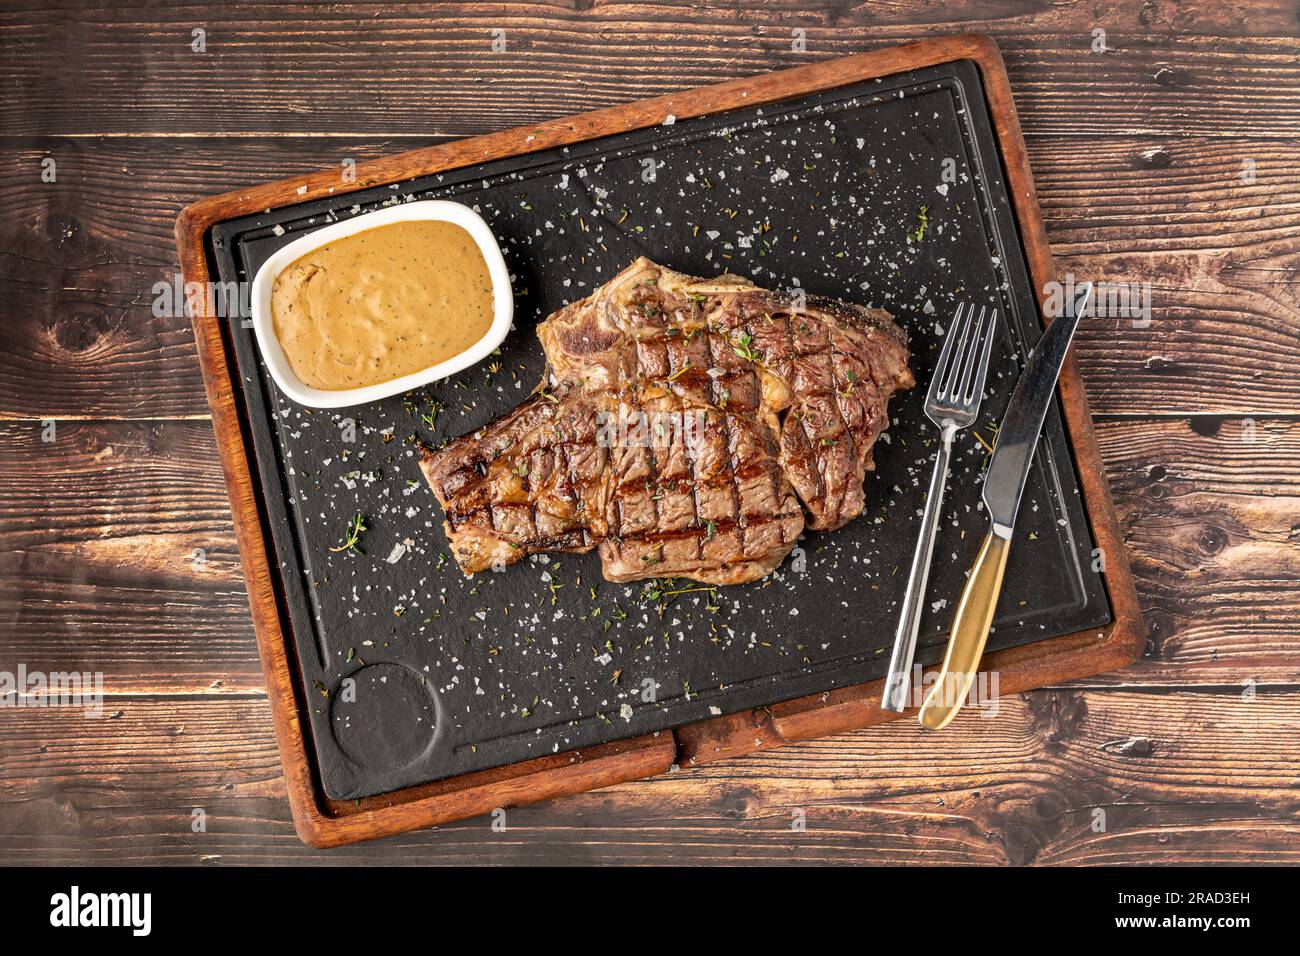 Grilled tomahawk steak on stone cutting board in steakhouse restaurant Stock Photo